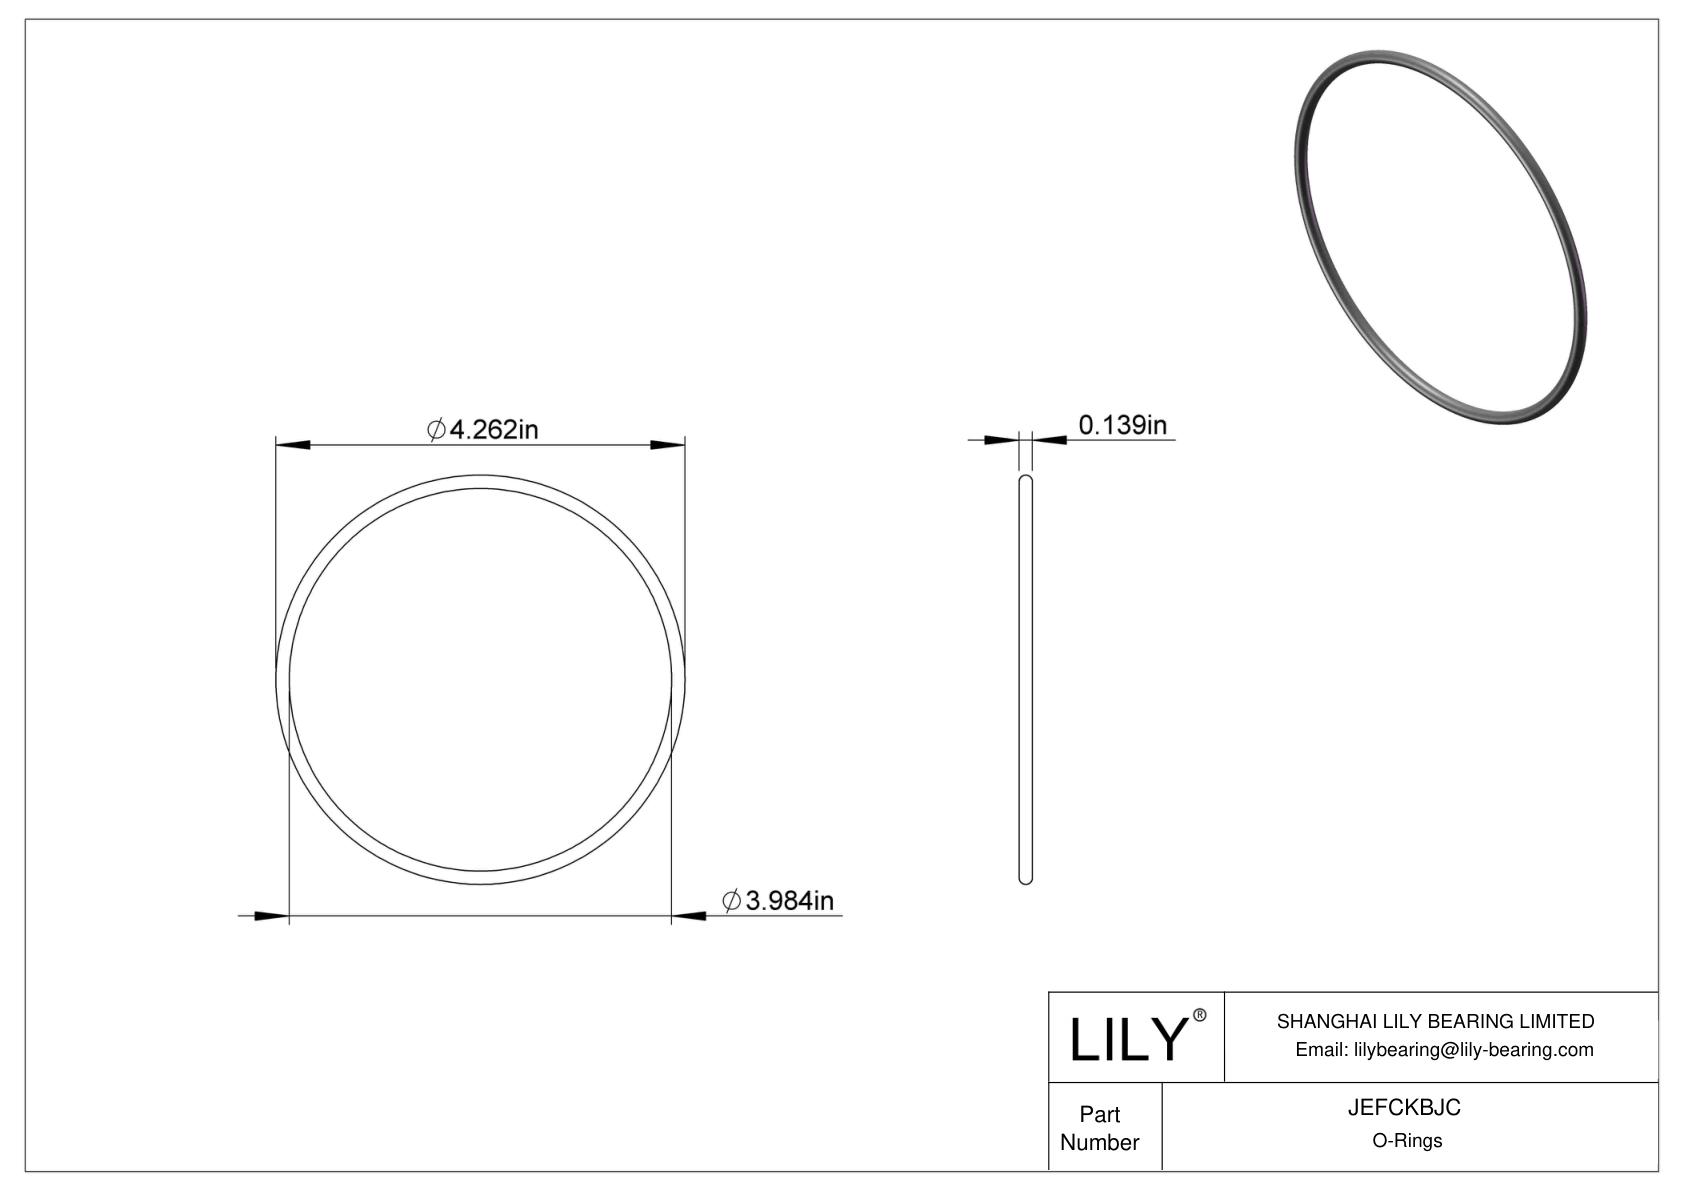 9452K192 | Oil Resistant O-Rings Round | Lily Bearing